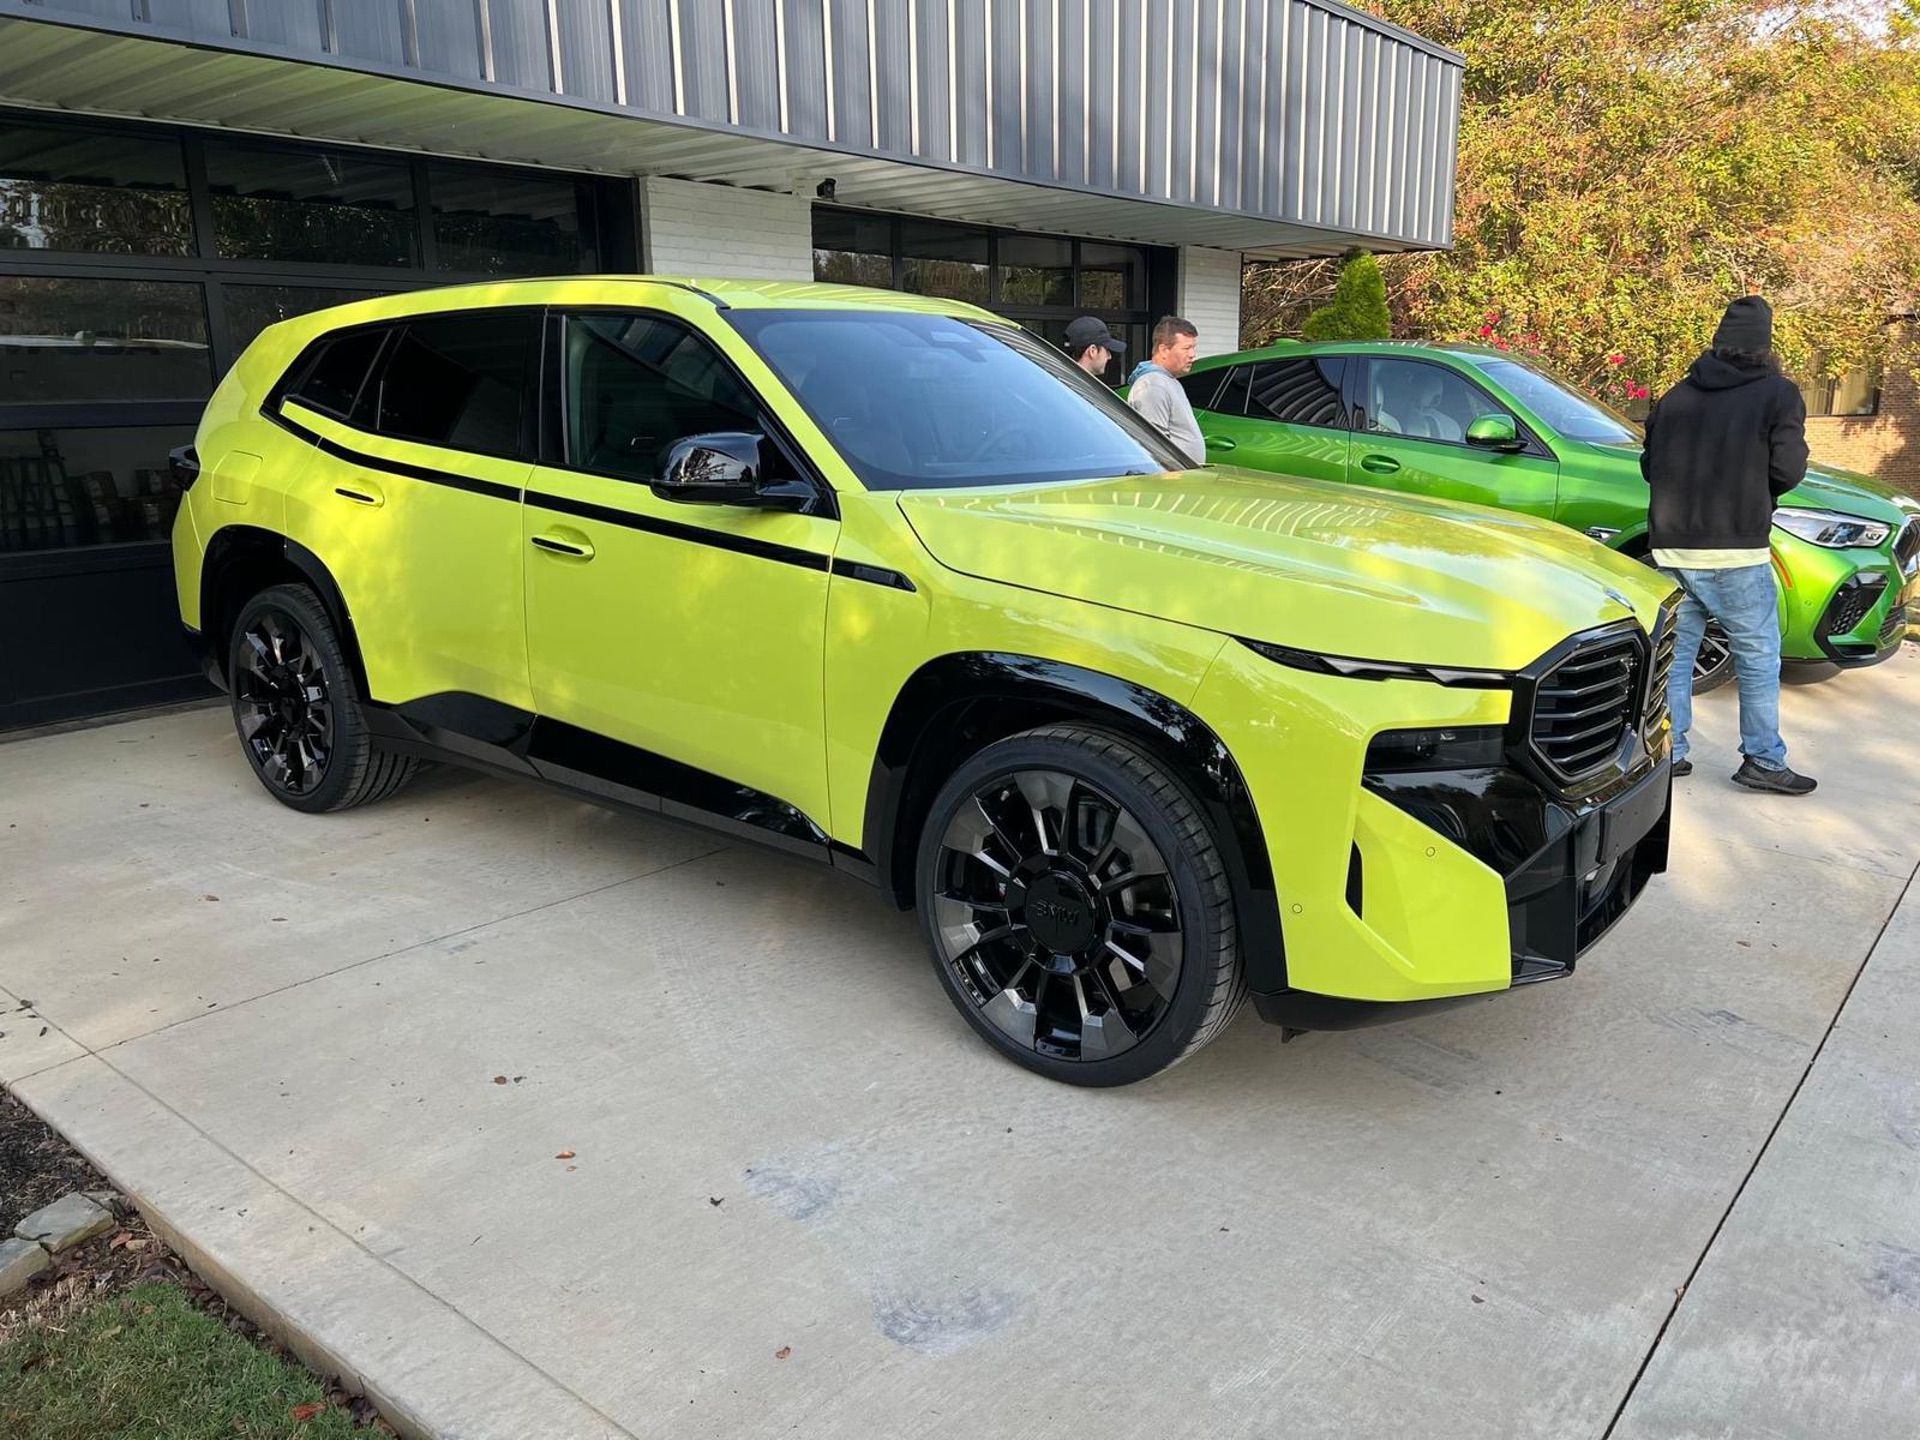 The 2023 BMW XM In Sao Paolo Yellow Paint is Certainly Eyecatching